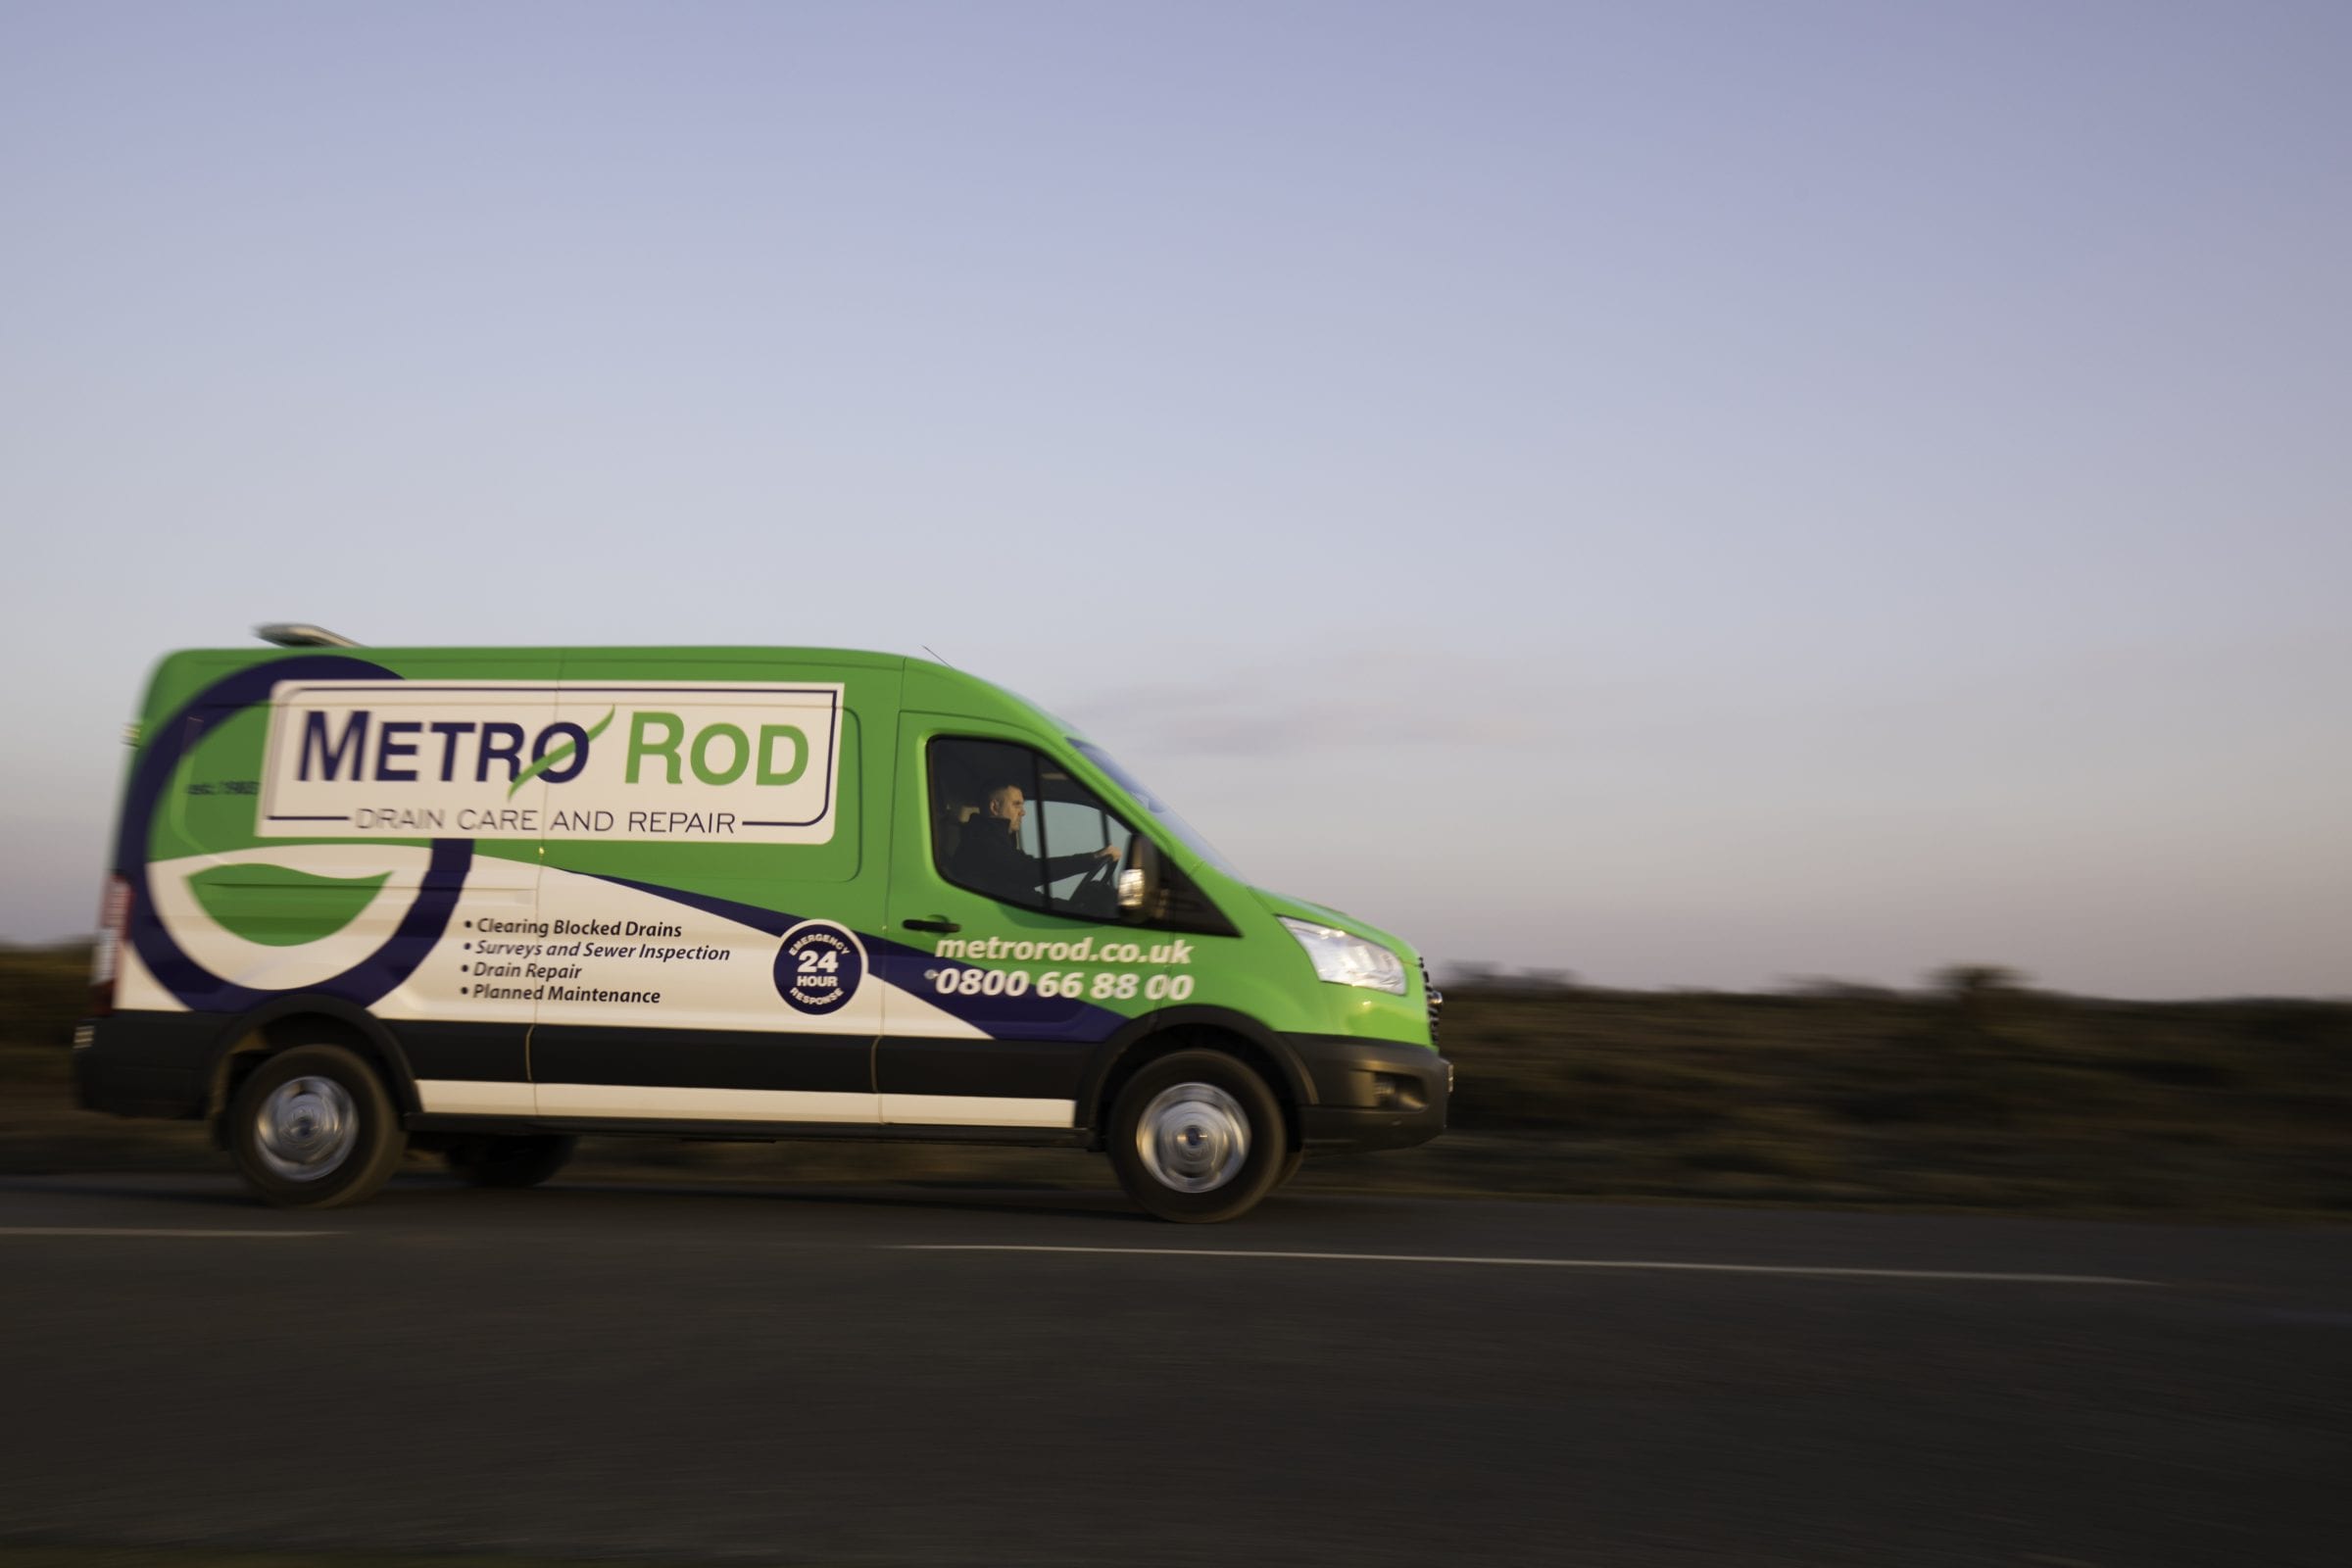 Working with Insurance Companies | Metro Rod Cumbria